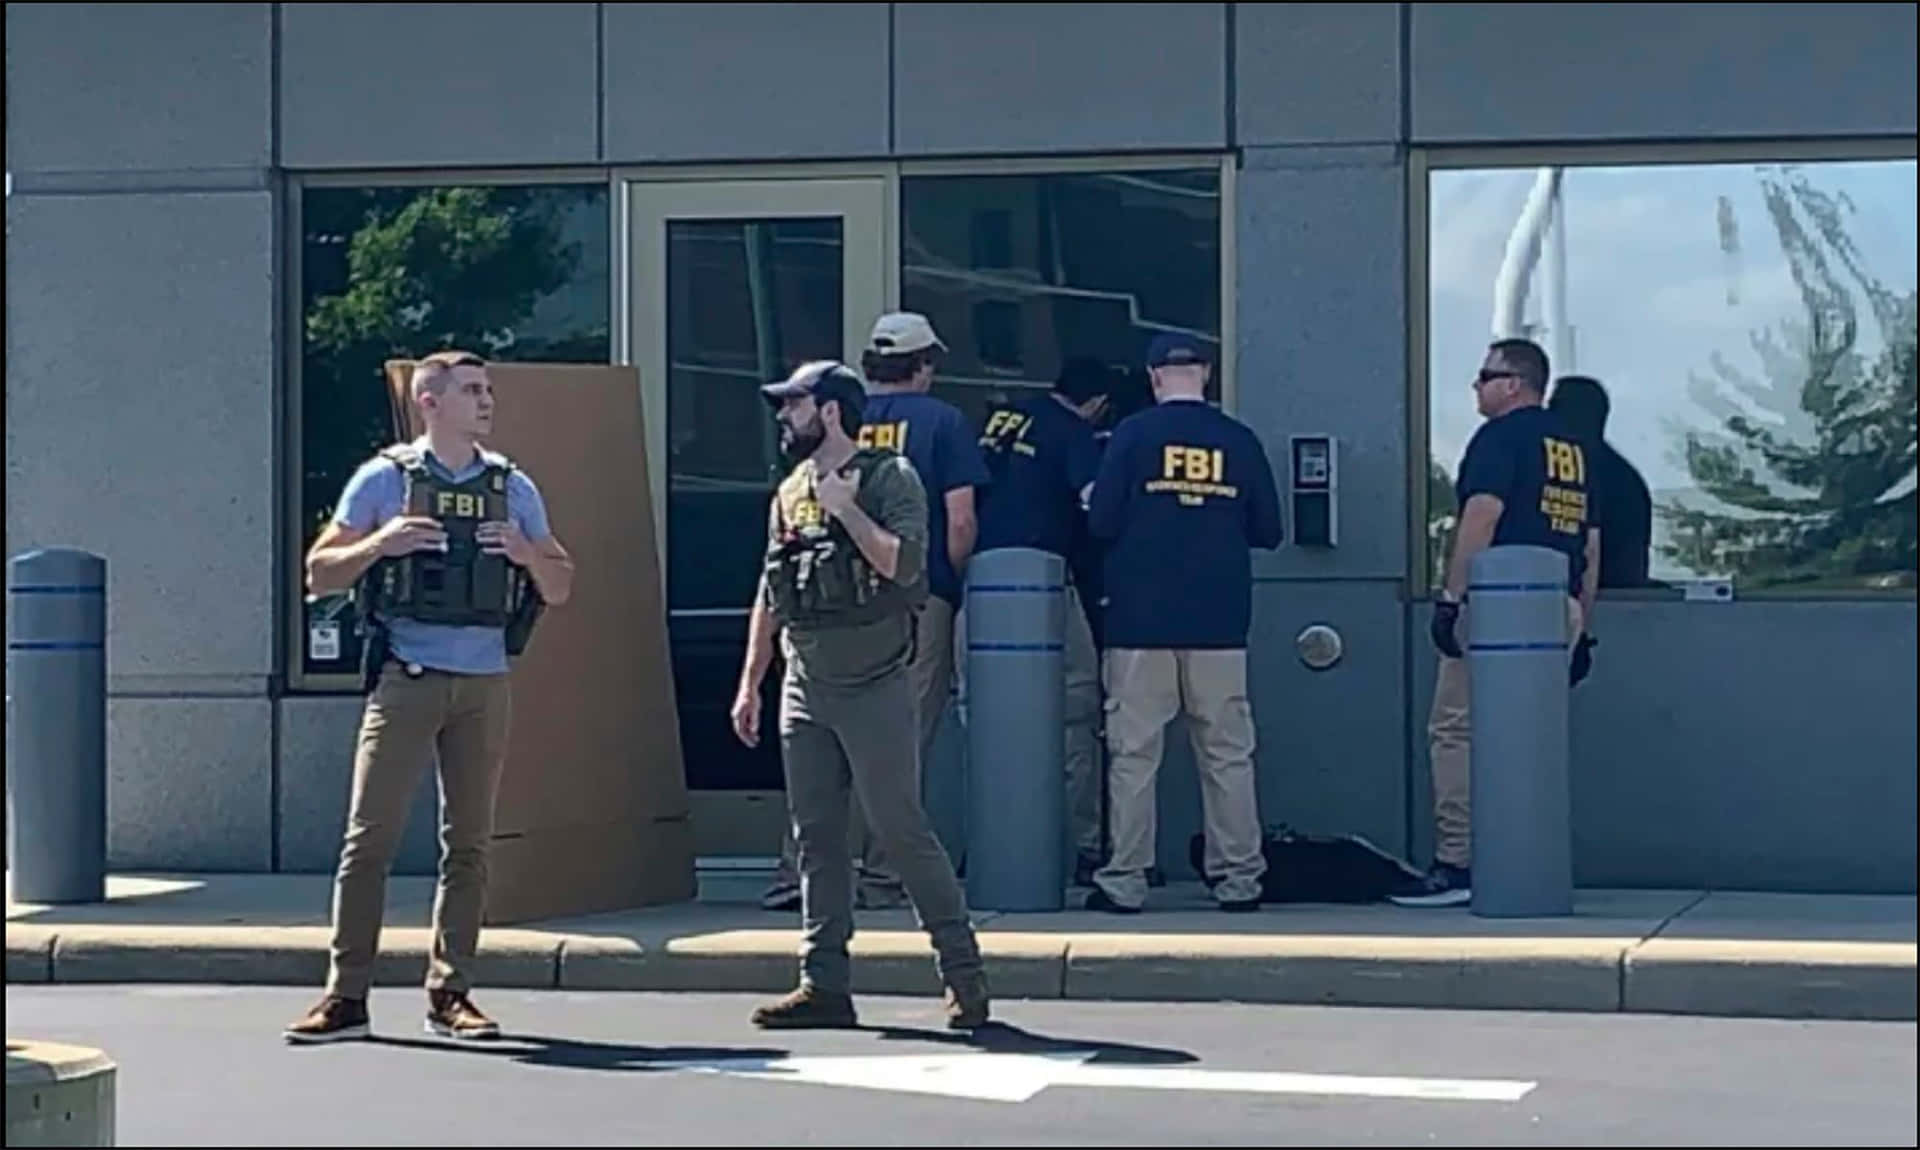 Fbi Agents Stand Outside A Building Wallpaper